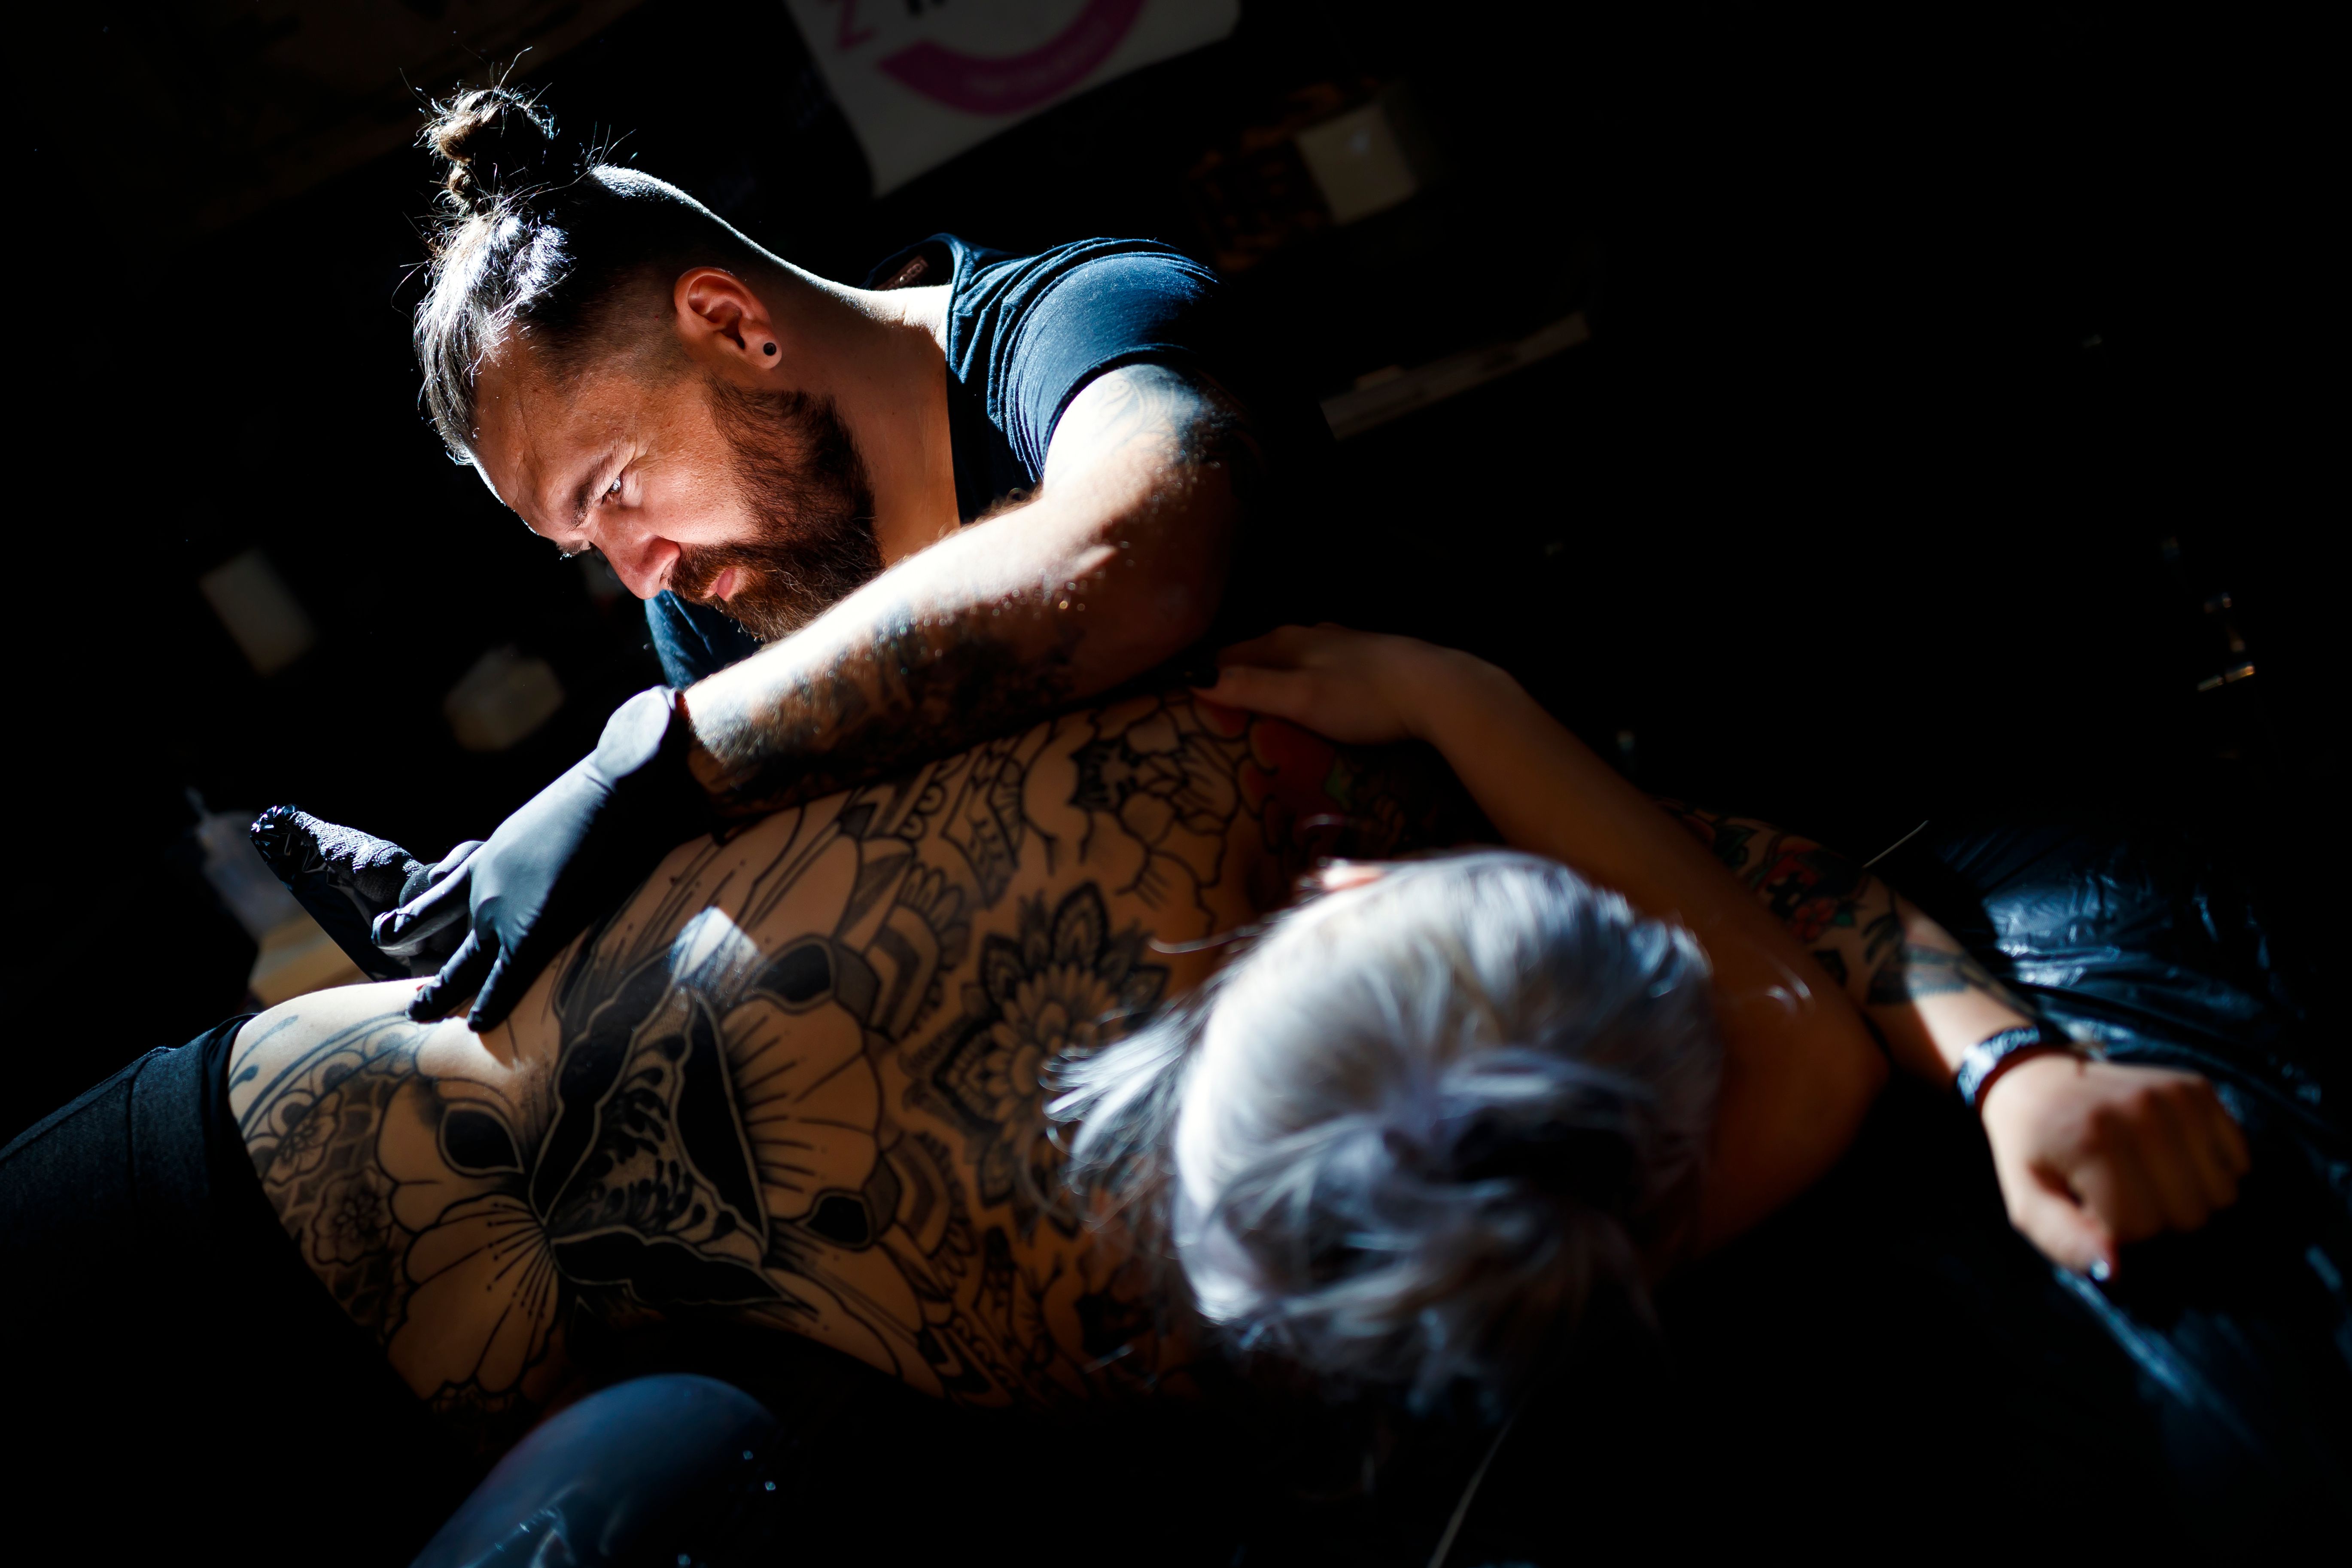 Get out the needle: Tattoo artists show off their skills | The Seattle Times